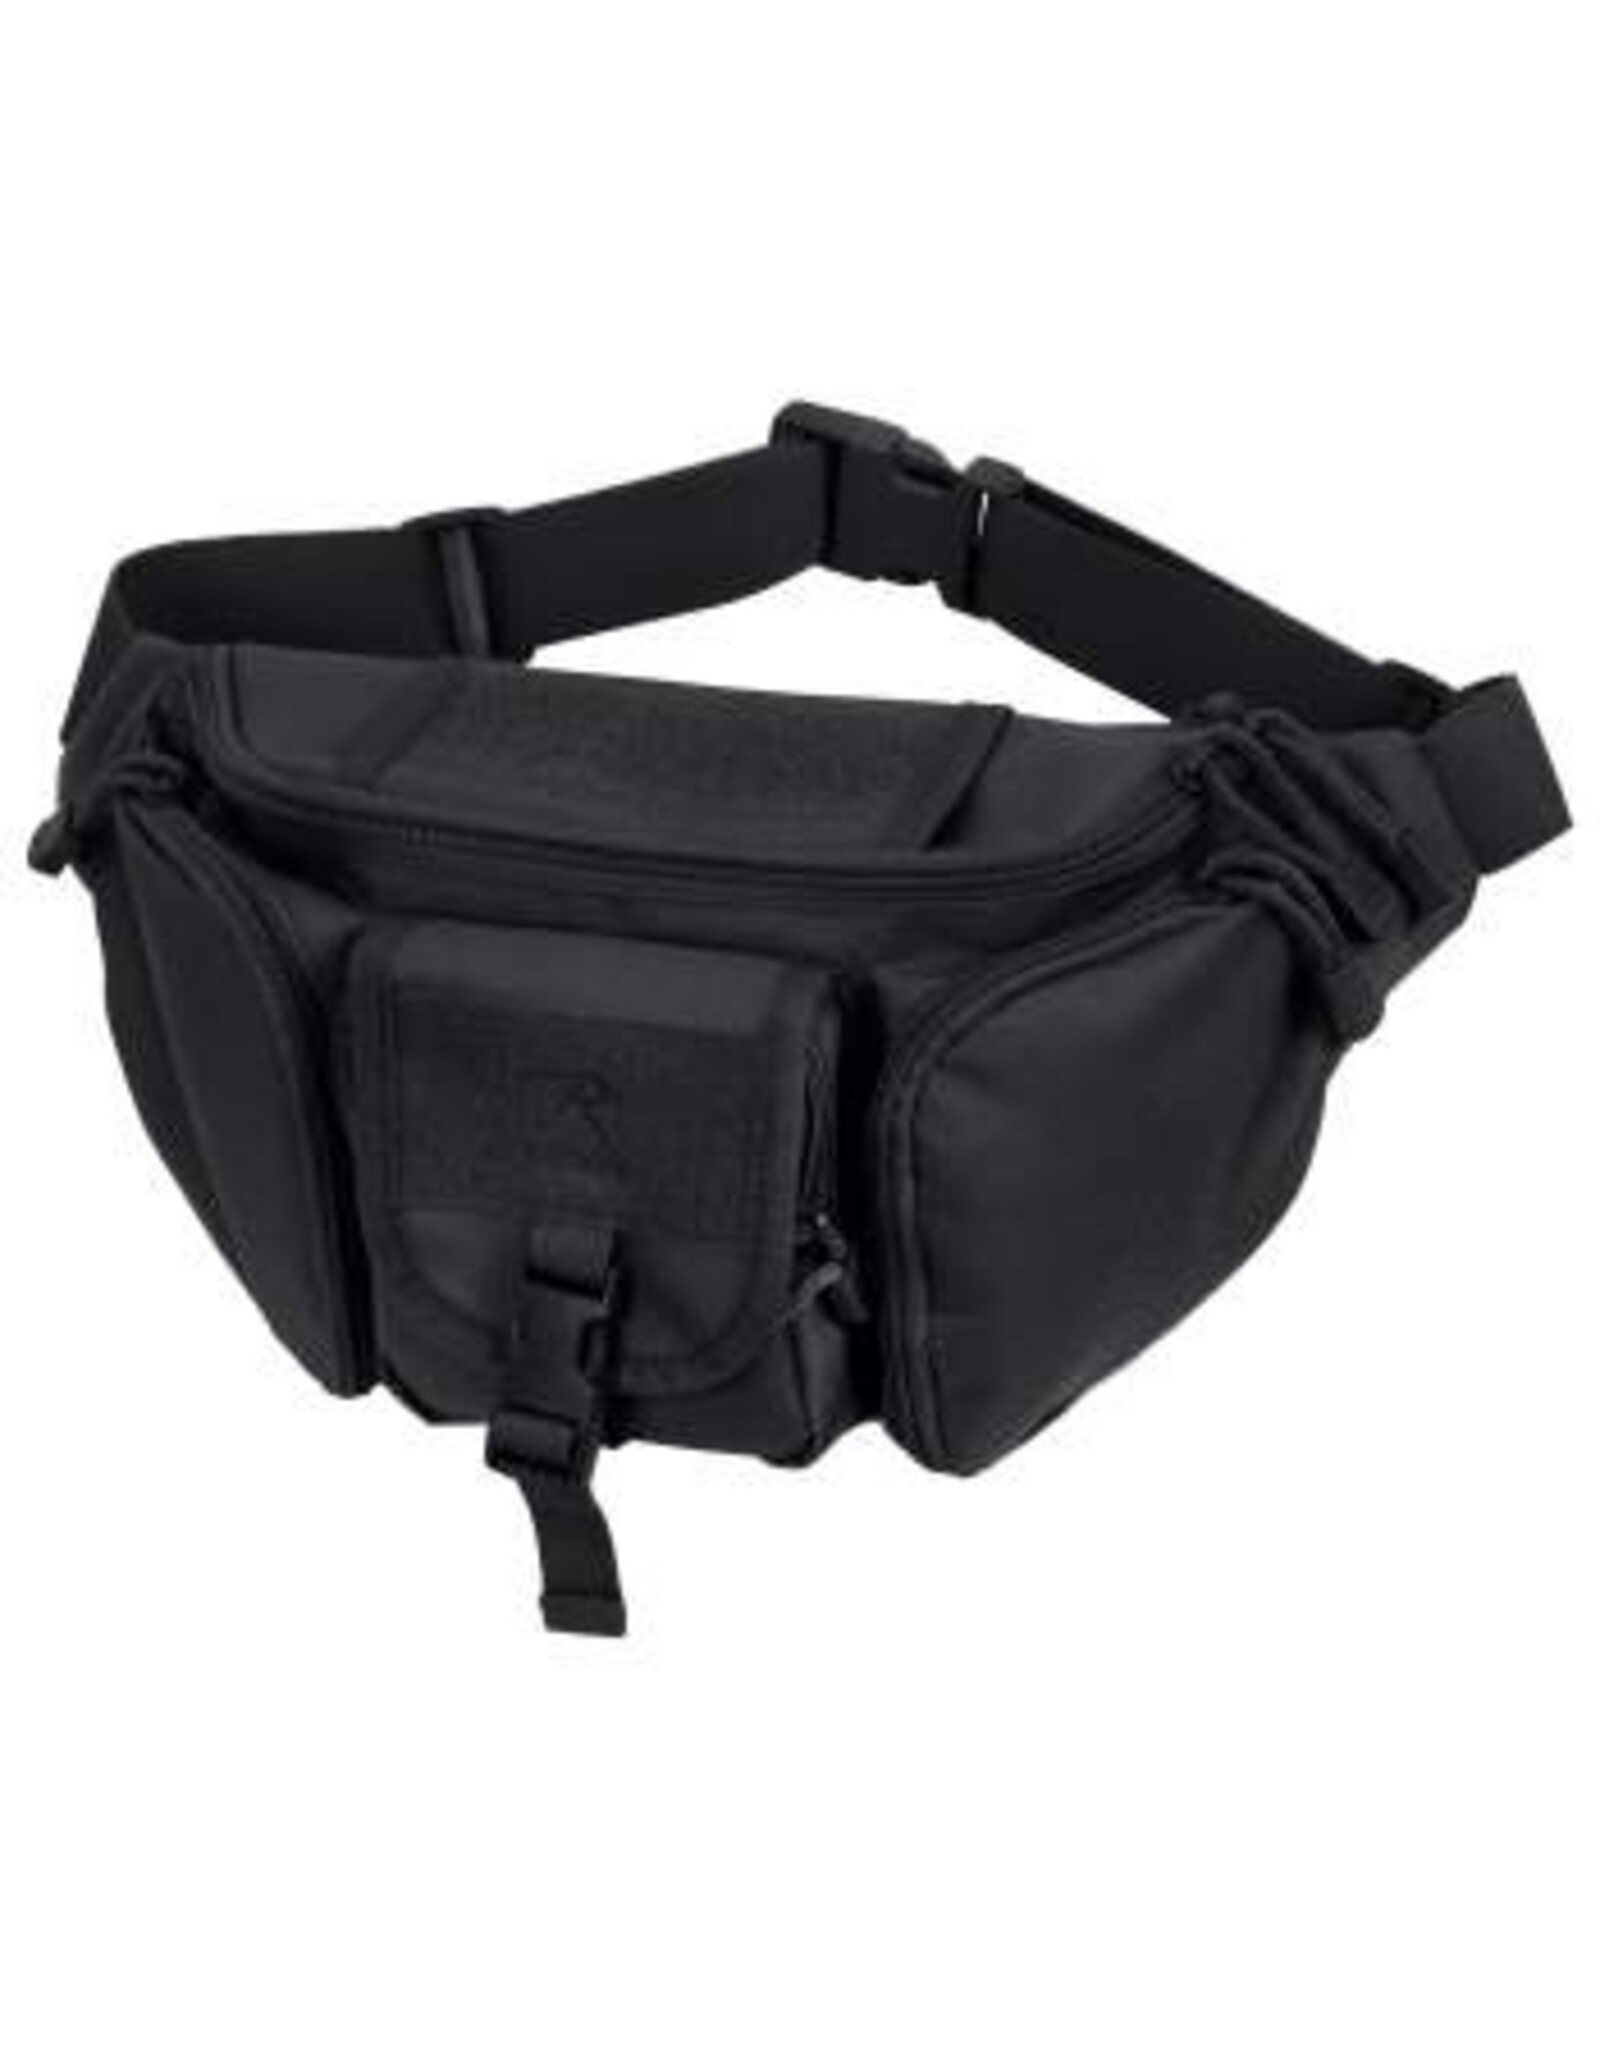 ROTHCO TACTICAL CONCEALED CARRY WAIST PACK